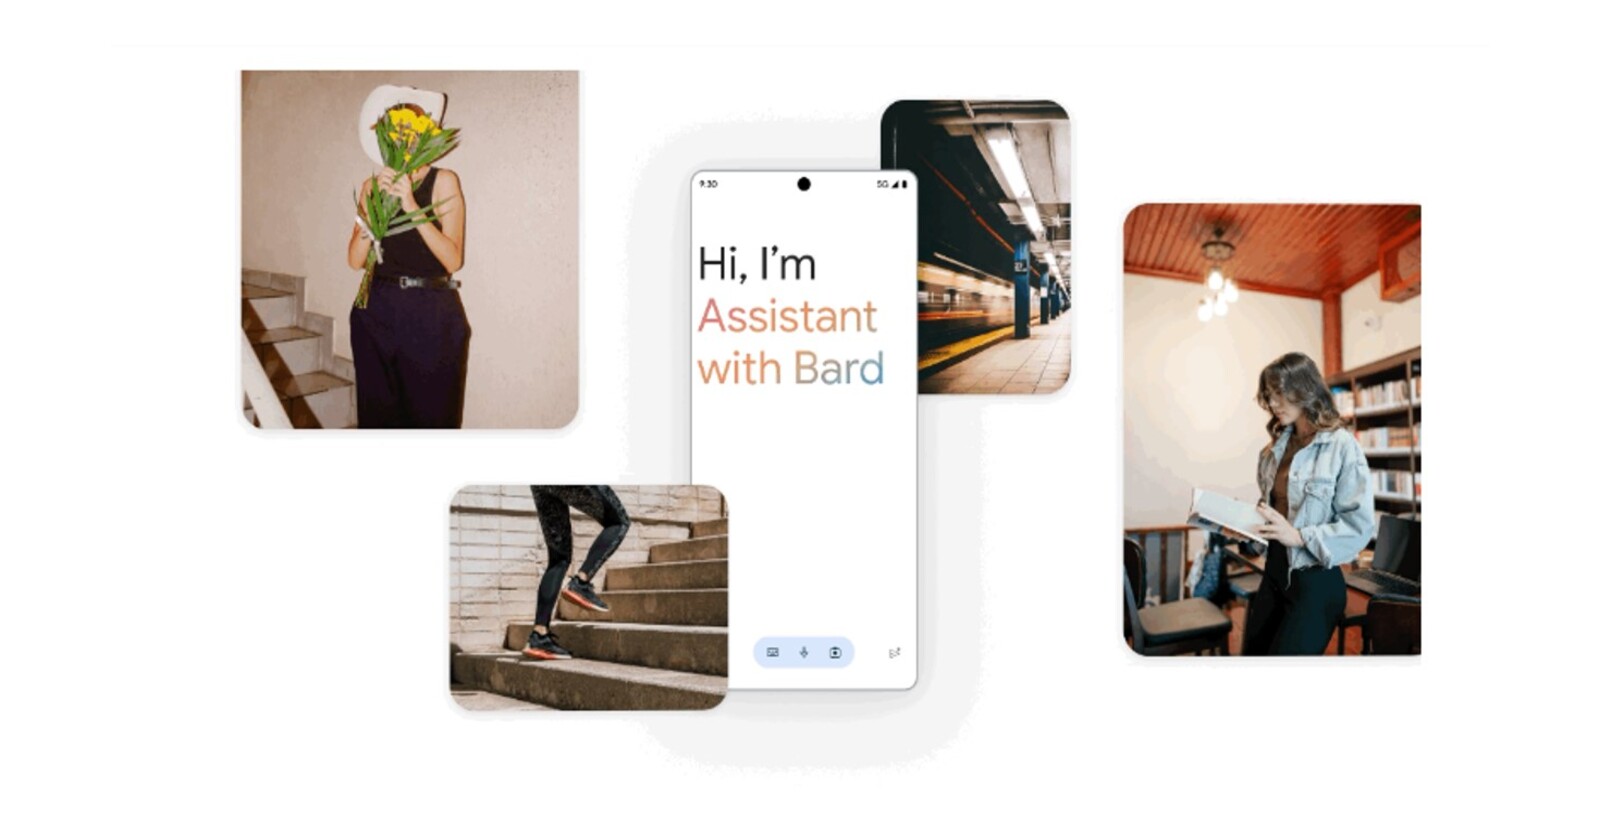 Pixel Tips app shows off video demo of upcoming Assistant with Bard feature